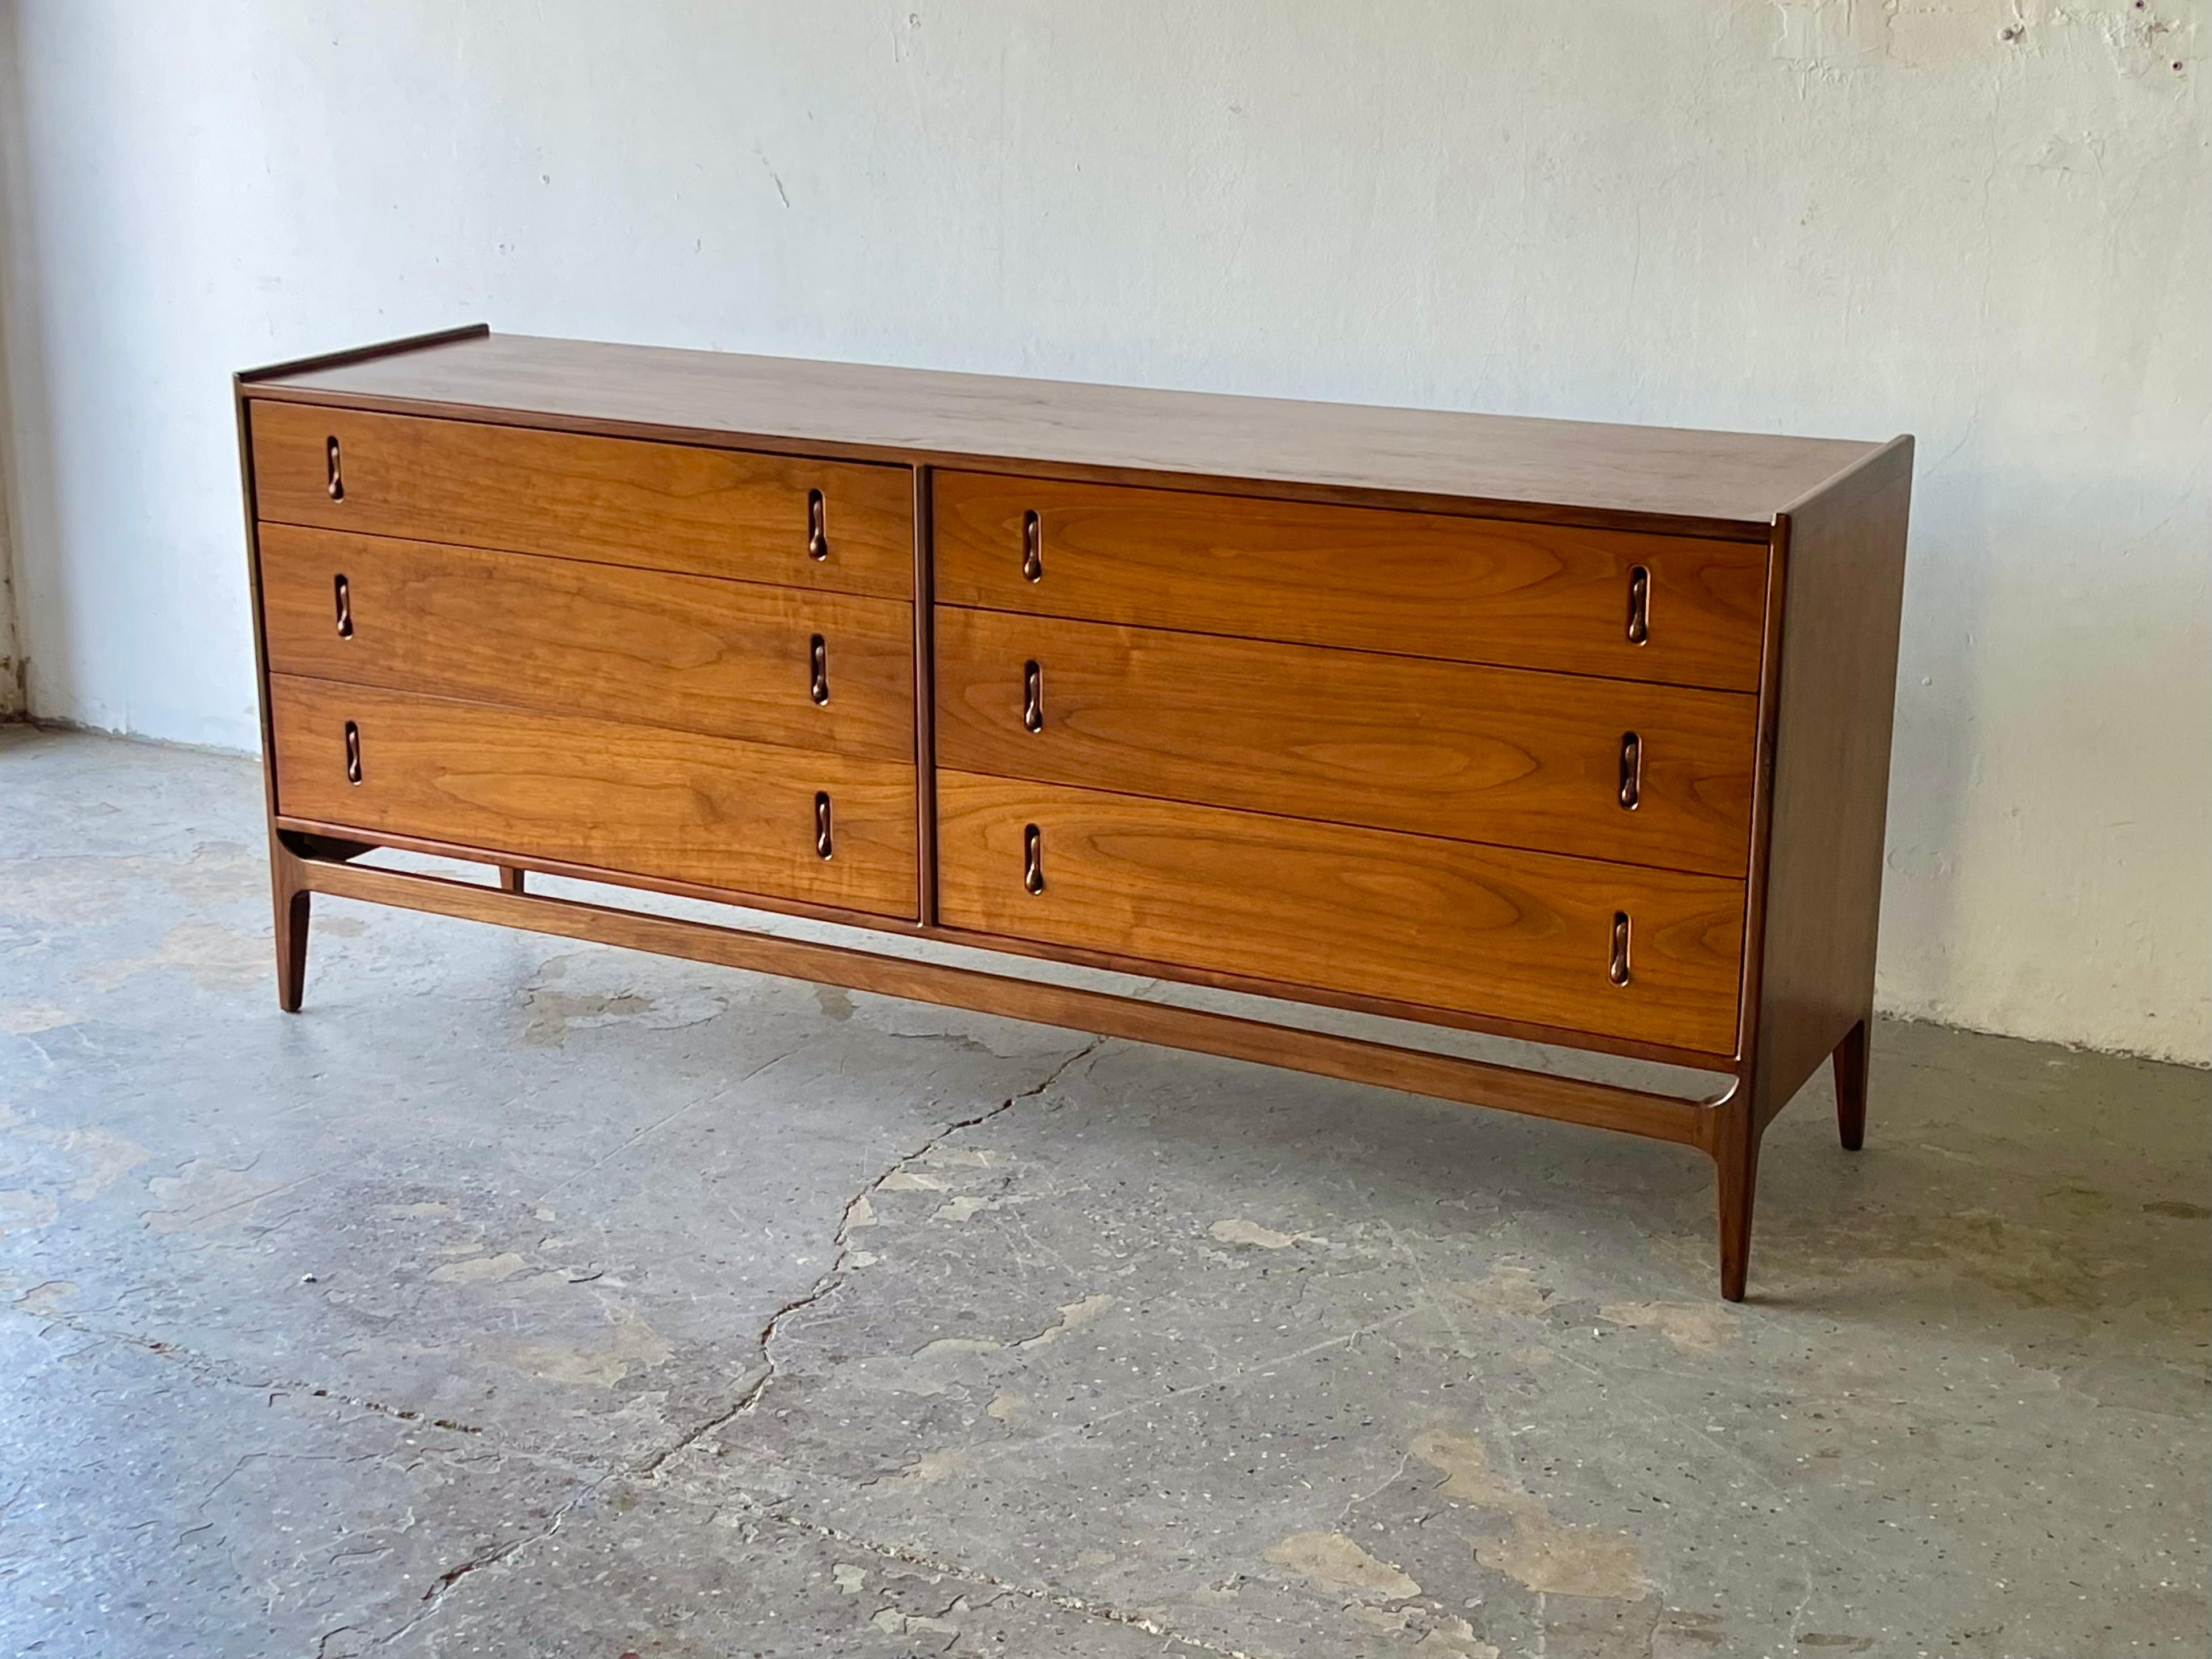 Richard Thompson for Glenn of California 6 Drawer Rosewood Dresser

This spacious Mid-Century Modern dresser designed by Richard Thompson for Glenn of California is truly unique. It is constructed in rosewood and walnut by one of the foremost